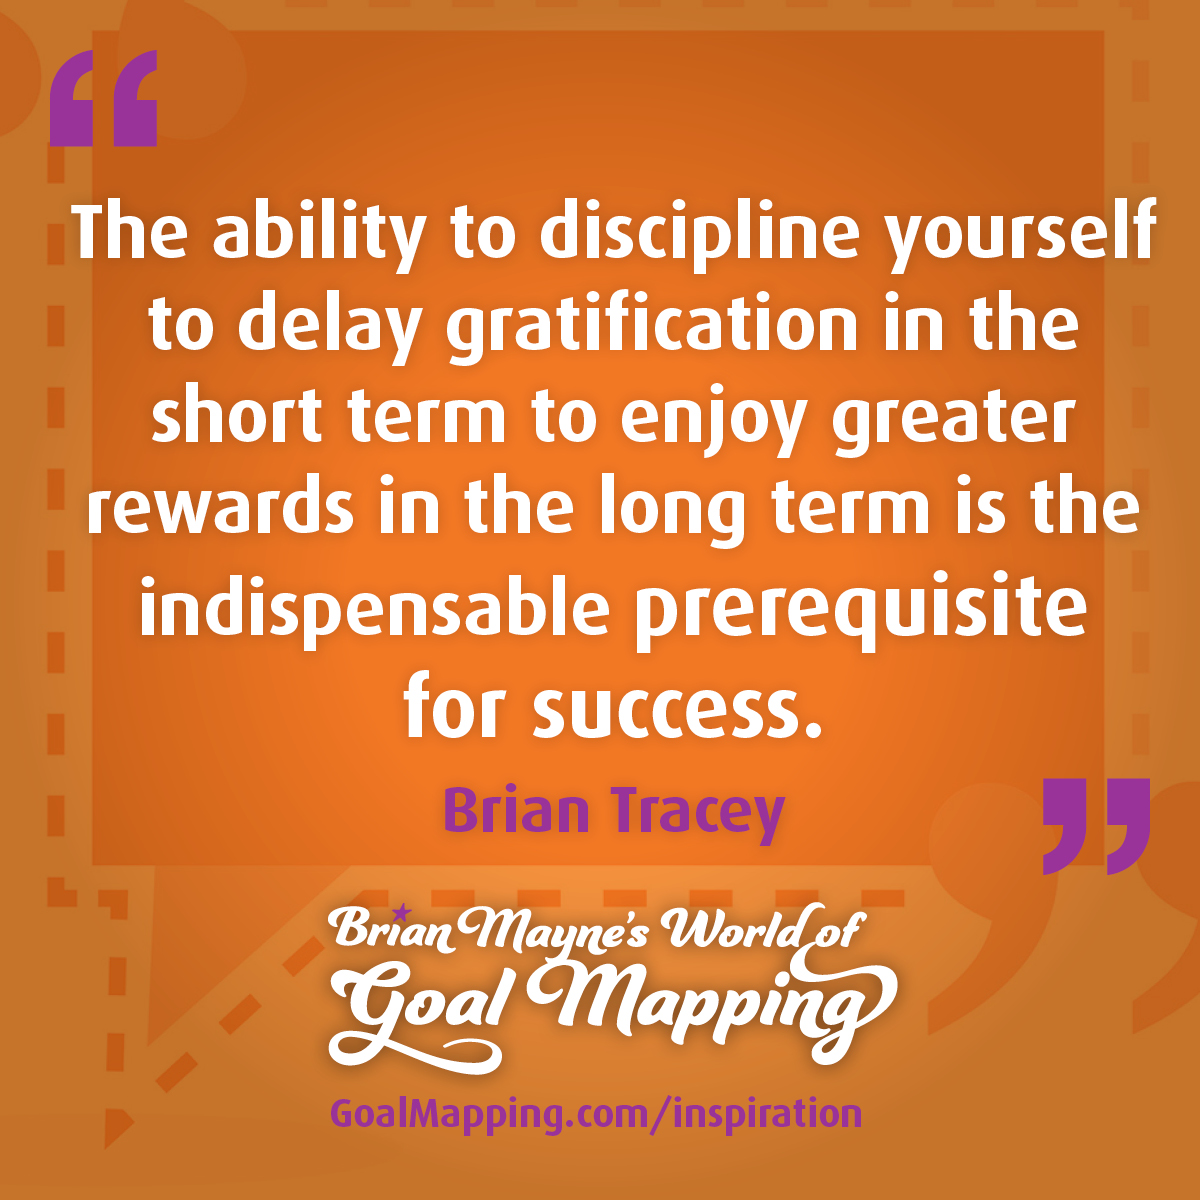 "The ability to discipline yourself to delay gratification in the short term to enjoy greater rewards in the long term is the indispensable prerequisite for success." Brian Tracey